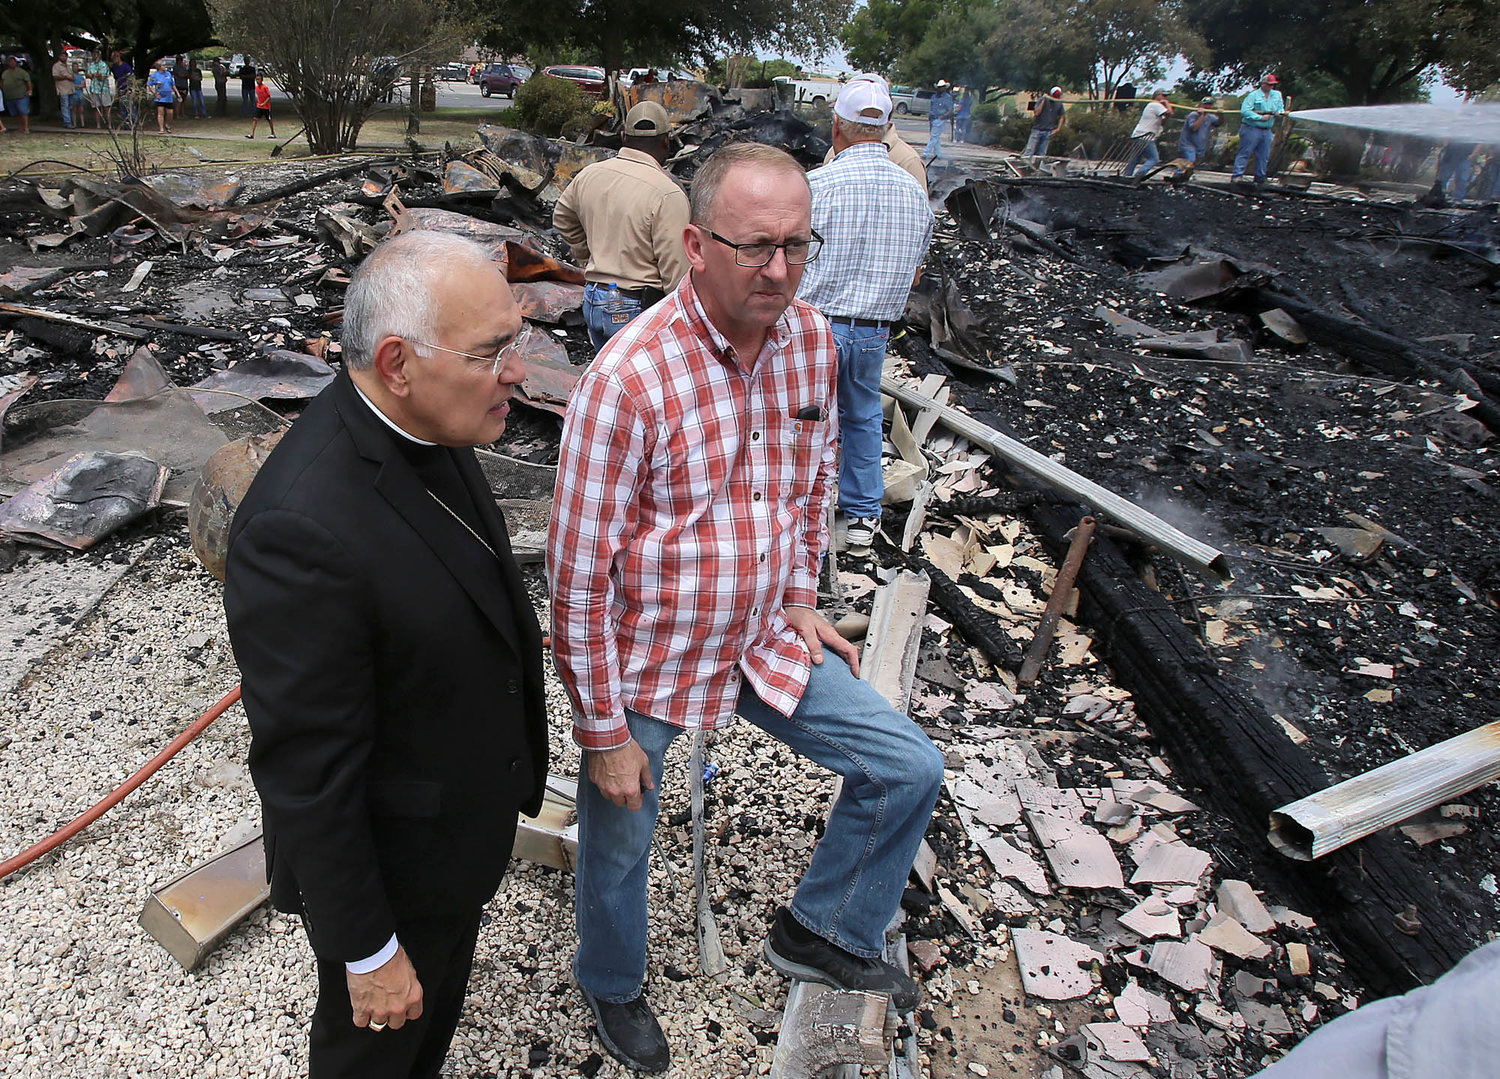 Bishop Joe S. Vasquez of Austin, Texas, and Father Darrell Kostiha, pastor at St. Joseph Parish in Cyclone and Sts. Cyril and Methodius Mission in Marak, look through debris of the Church of the Visitation in Westphalia July 29, 2019, after the 124-year-old church was destroyed in a fire. Since 1883 the parish has served the Catholic community of southwestern Falls County, many of whom are descendents of immigrants from the northwest German region of Westphalia.